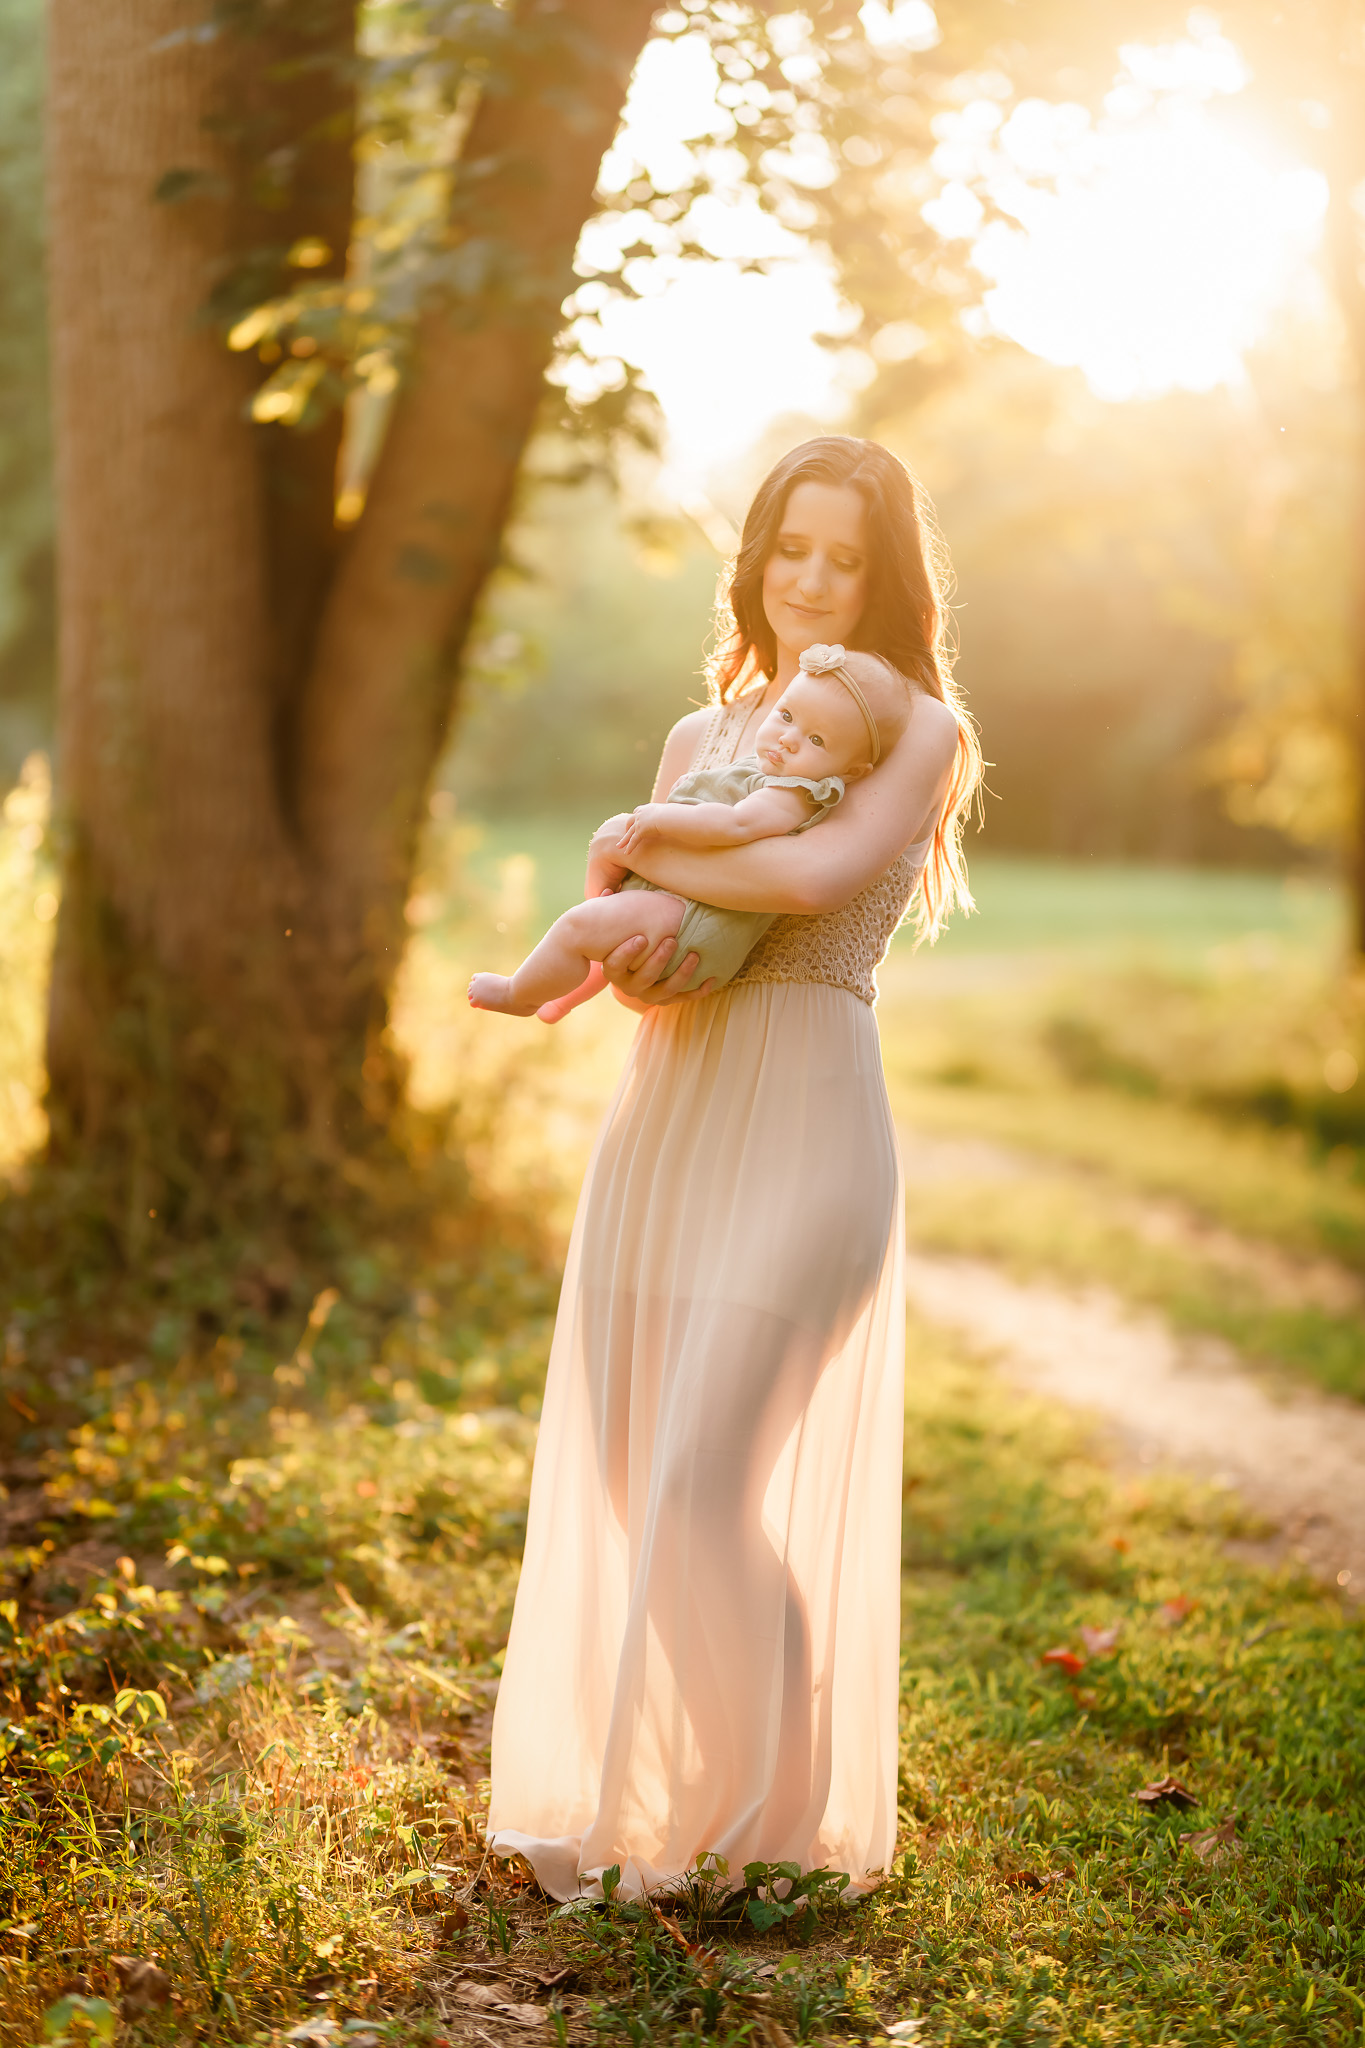 family photographers charlotte nc mother and baby in golden hour natural light portrait